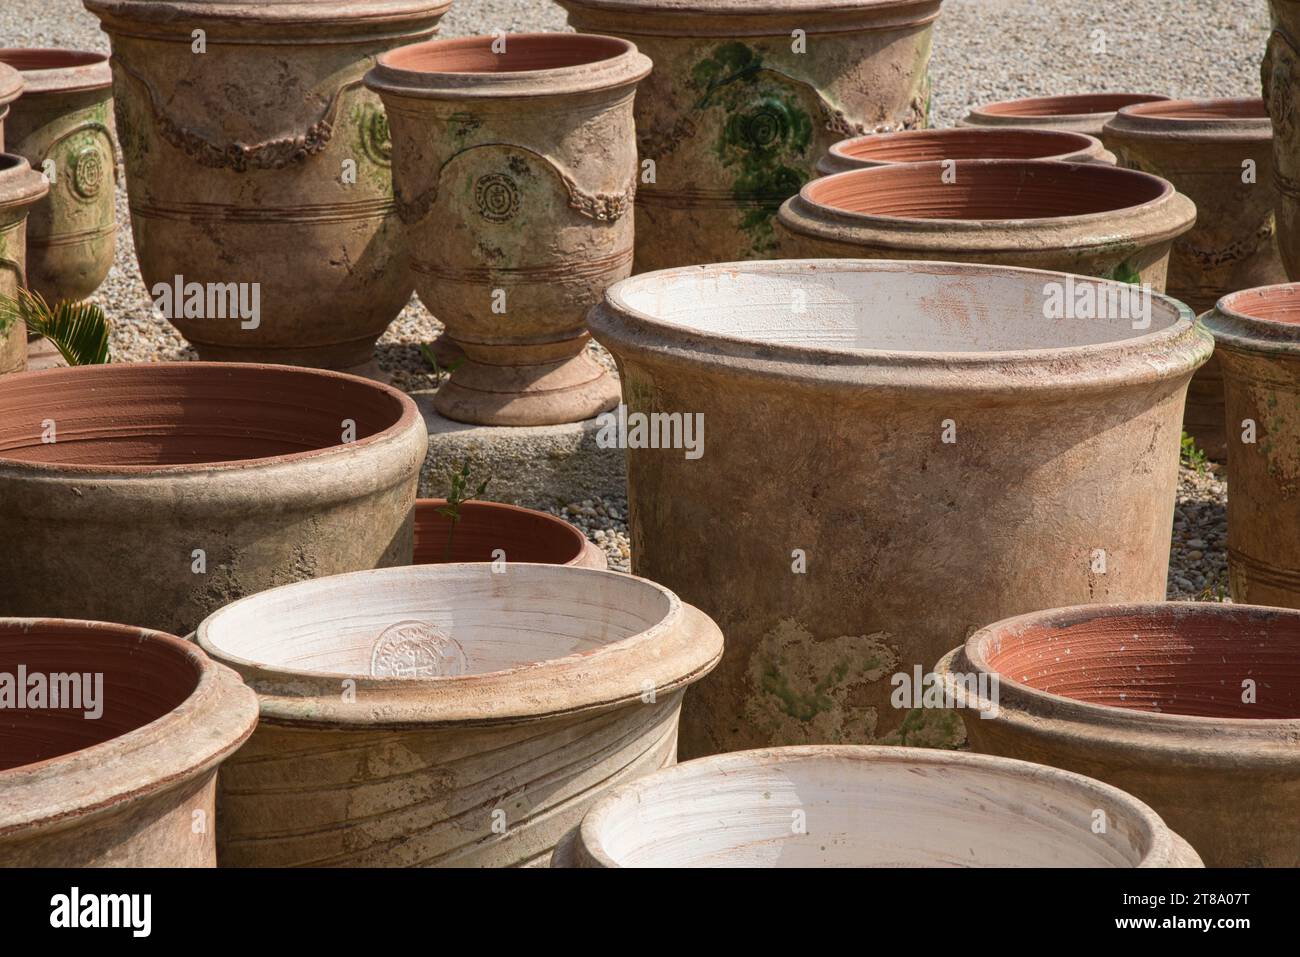 éventail de celebres et traditionnelles poteries d'anduze / range of famous and traditional pottery from anduze Stock Photo